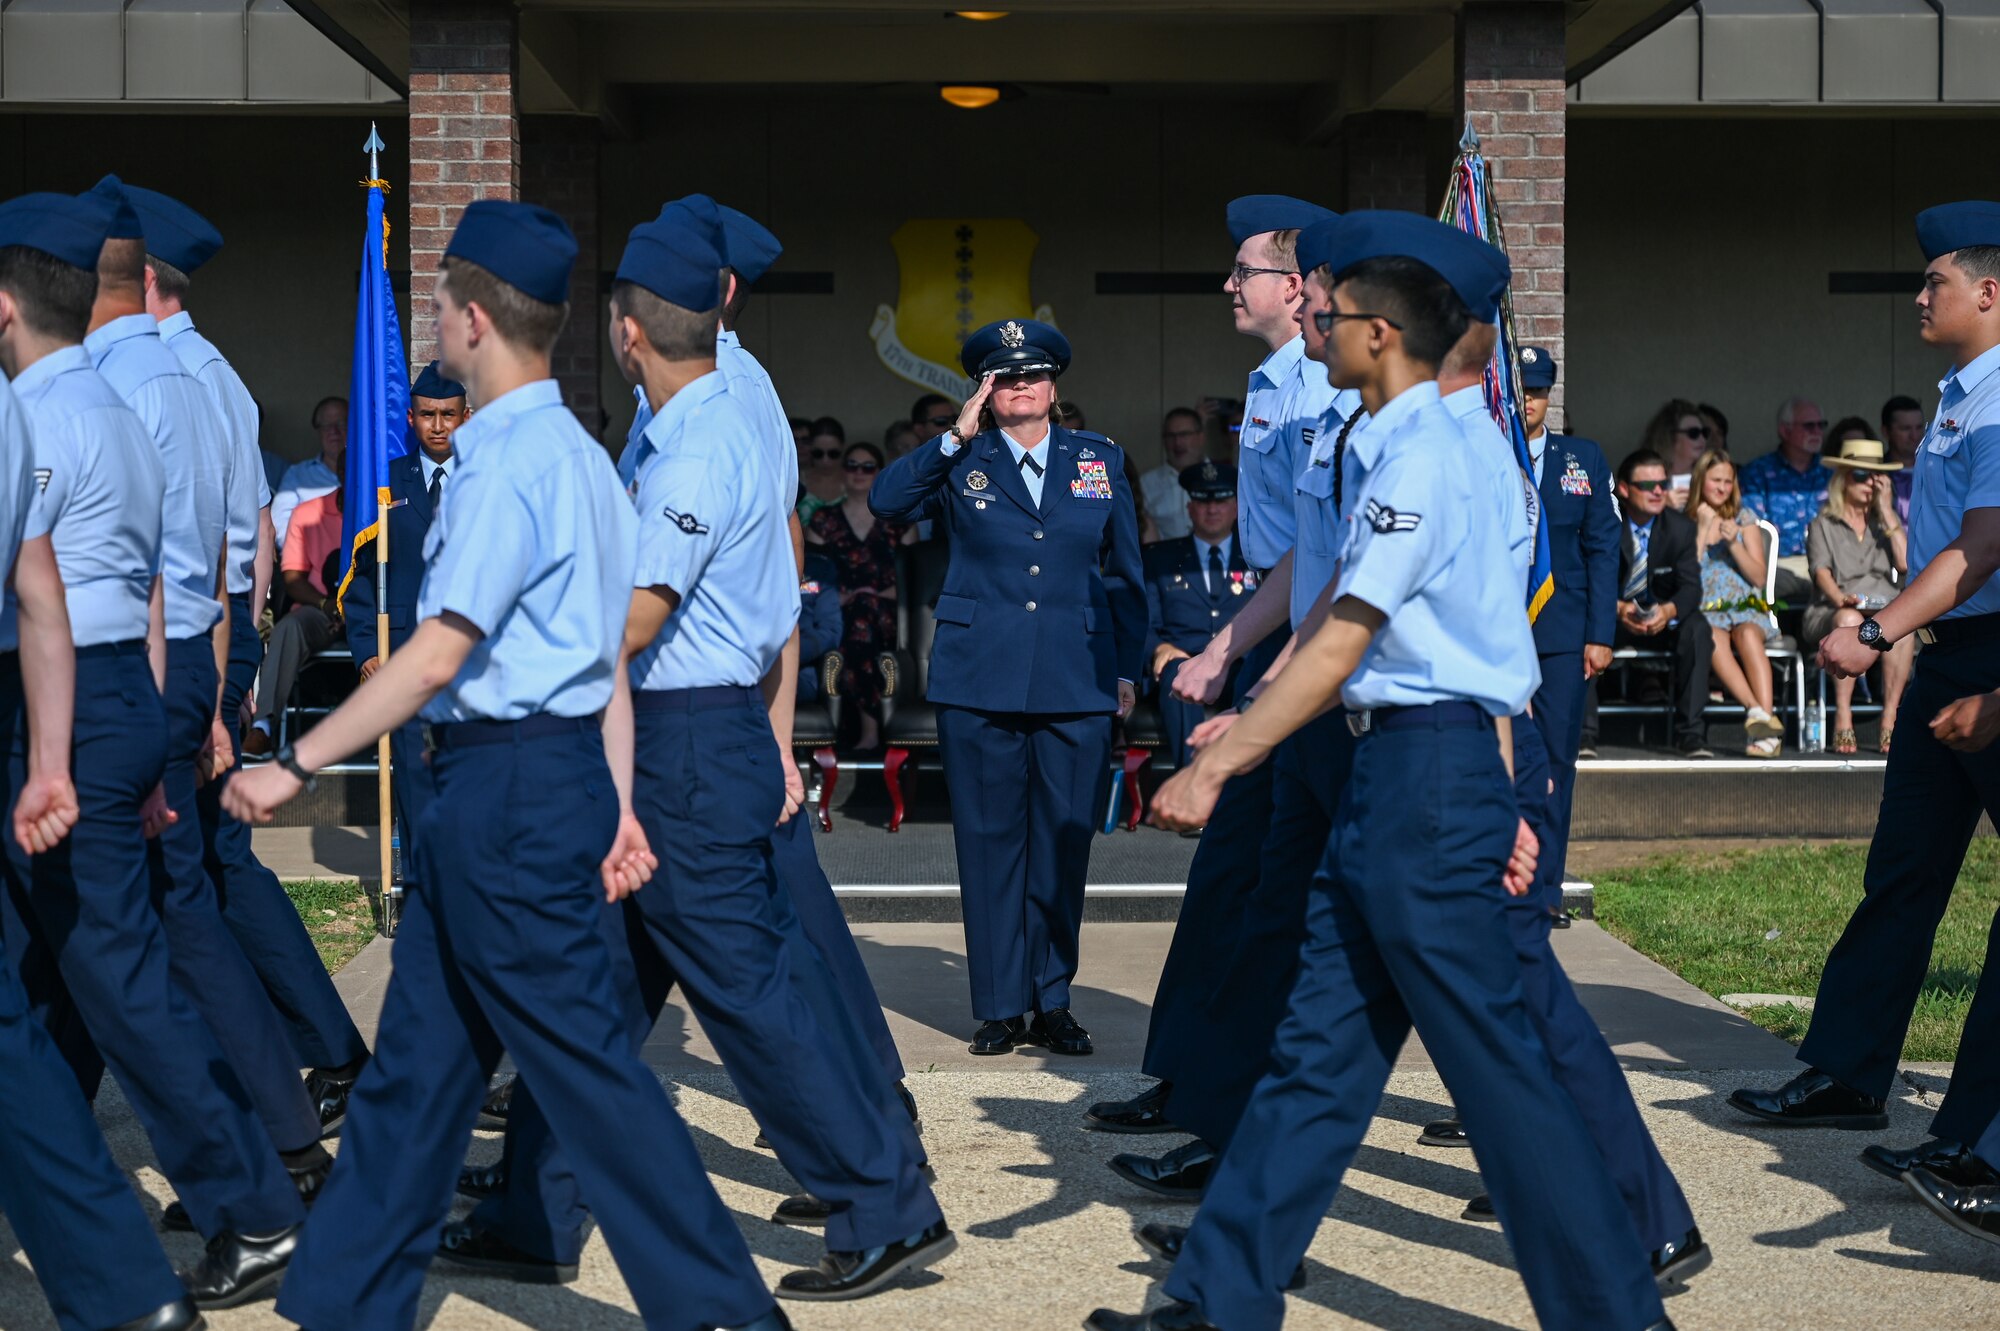 U.S. Air Force Airmen assigned to the 17th Training Wing conduct a Pass in Review to U.S. Air Force Col. Angelina Maguinness, 17th TRW commander, during the change of command ceremony at Goodfellow Air Force Base, Texas, June 16, 2023. The salute represents the squadron welcoming its new commander. (U.S. Air Force photo by Senior Airman Sarah Williams)